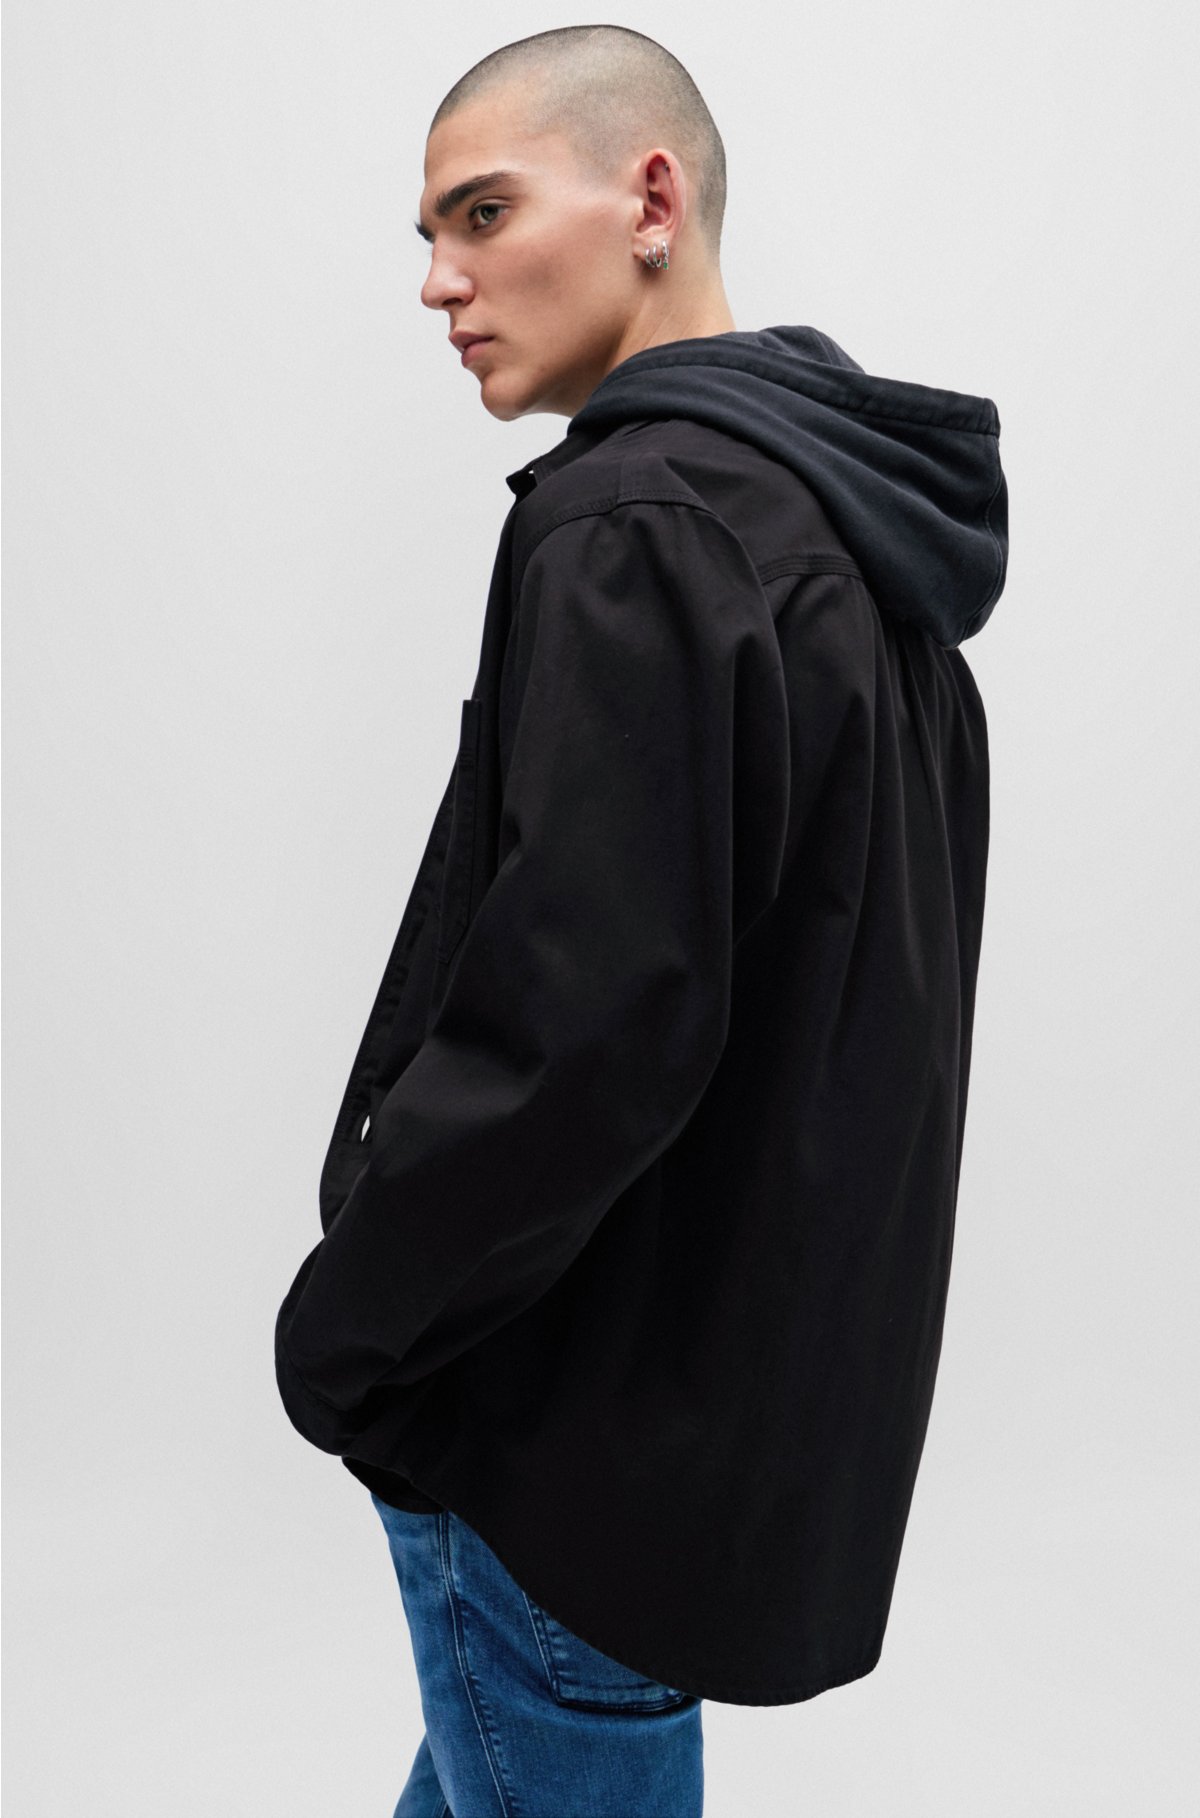 Oversized-fit shirt in cotton twill with logo label, Black